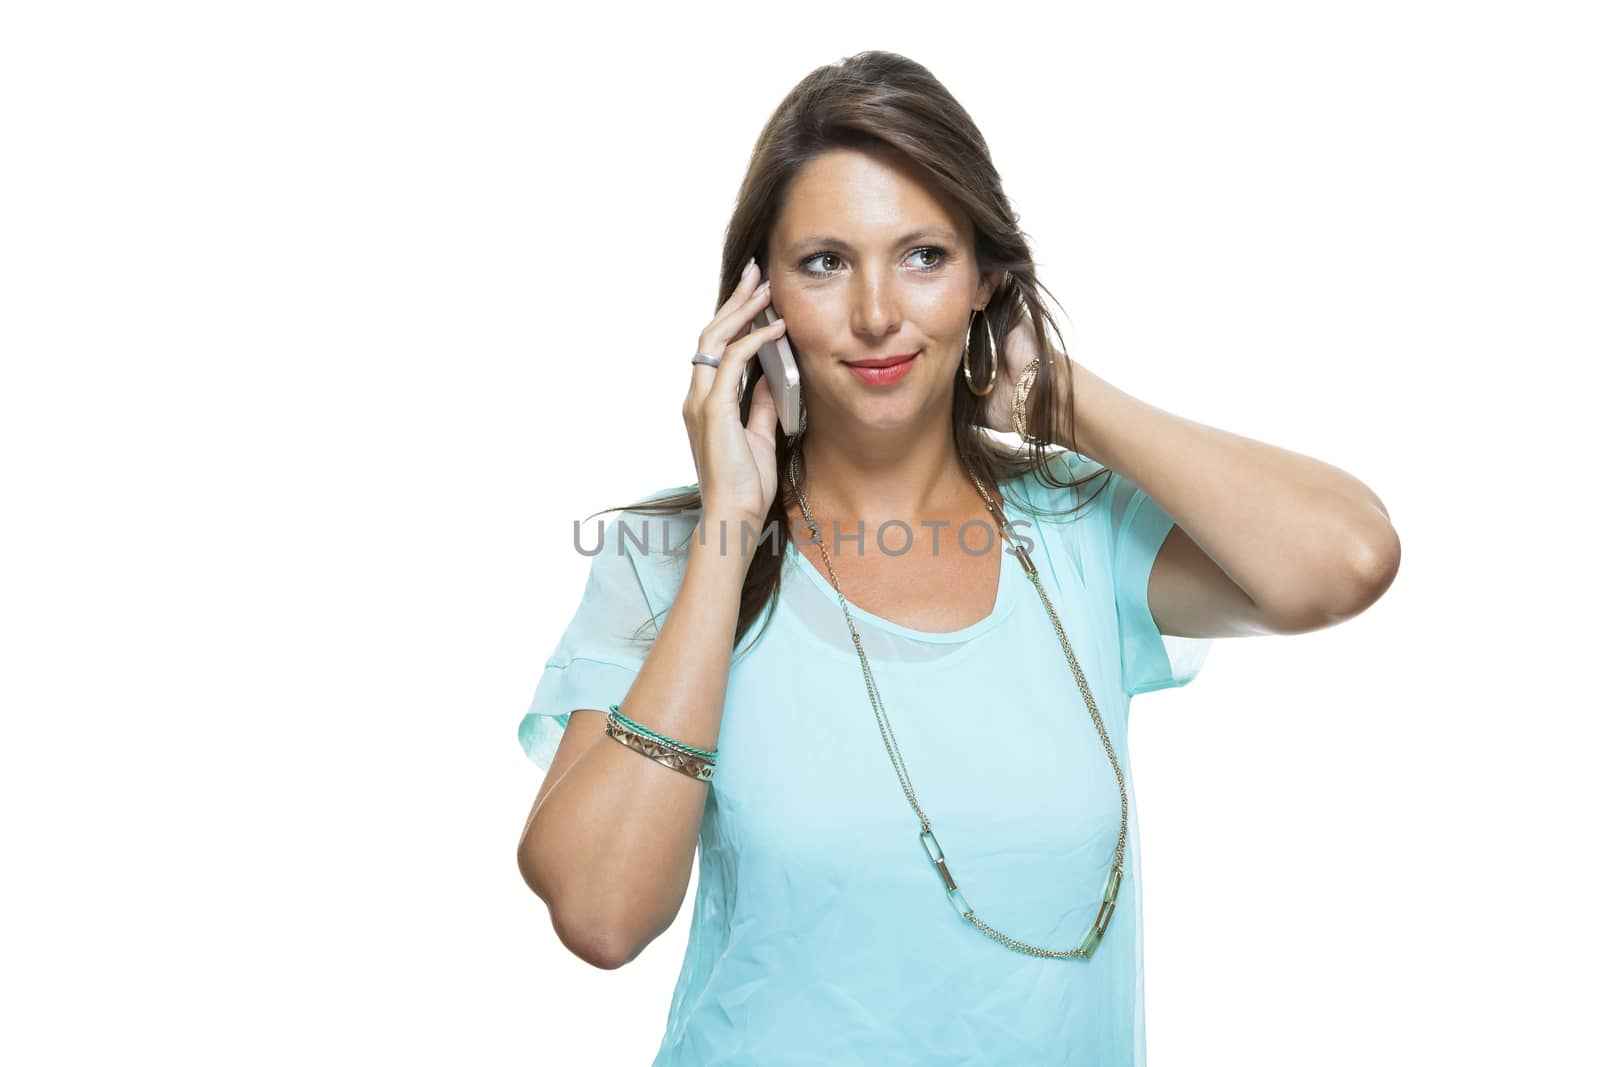 Portrait of Pretty Happy Woman in Casual Clothing Looking Something at her Mobile Phone on Hand. Captures in Studio with White Background.